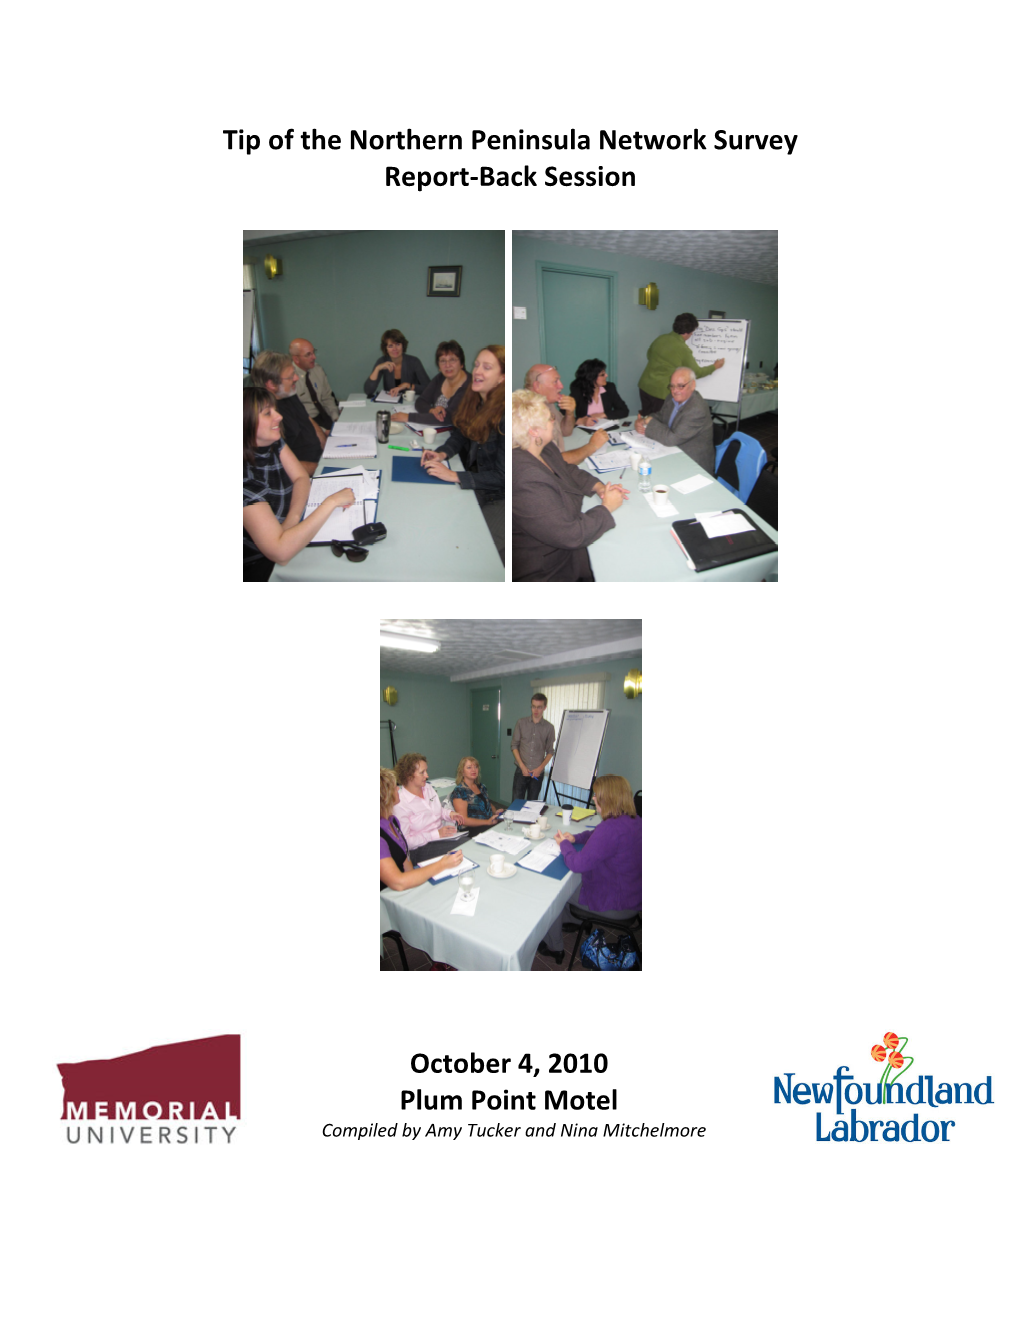 Tip of the Northern Peninsula Network Survey Report-Back Session